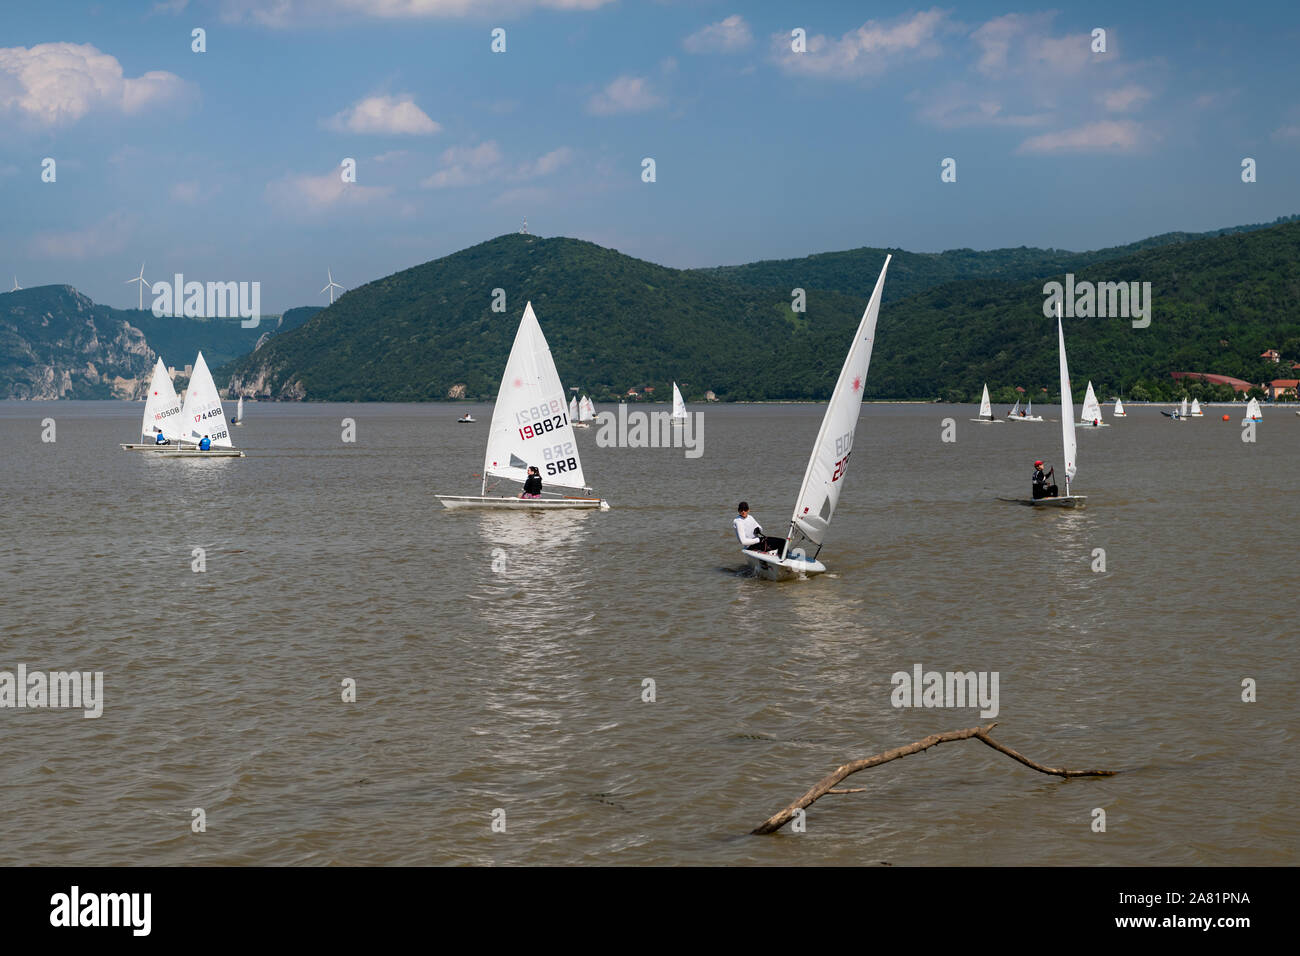 Sunny morning view of restless wather and lots of windsurfing seaboats  on the river Danube, with mountines in the background and cloudy sky high abov Stock Photo